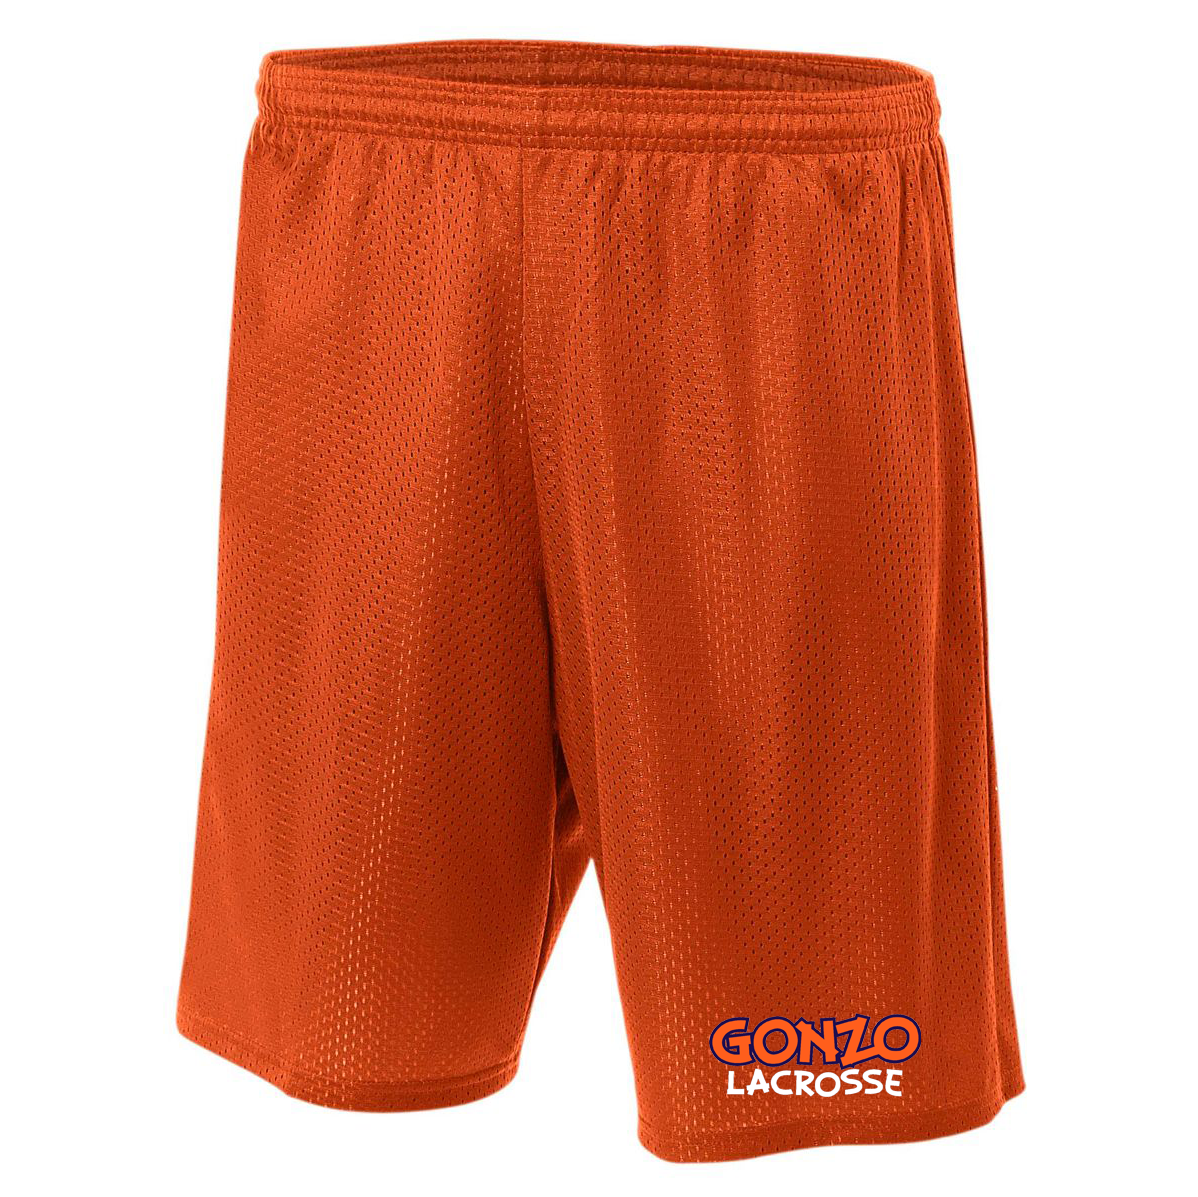 Gonzo Lacrosse 7" Lined Tricot Mesh Shorts